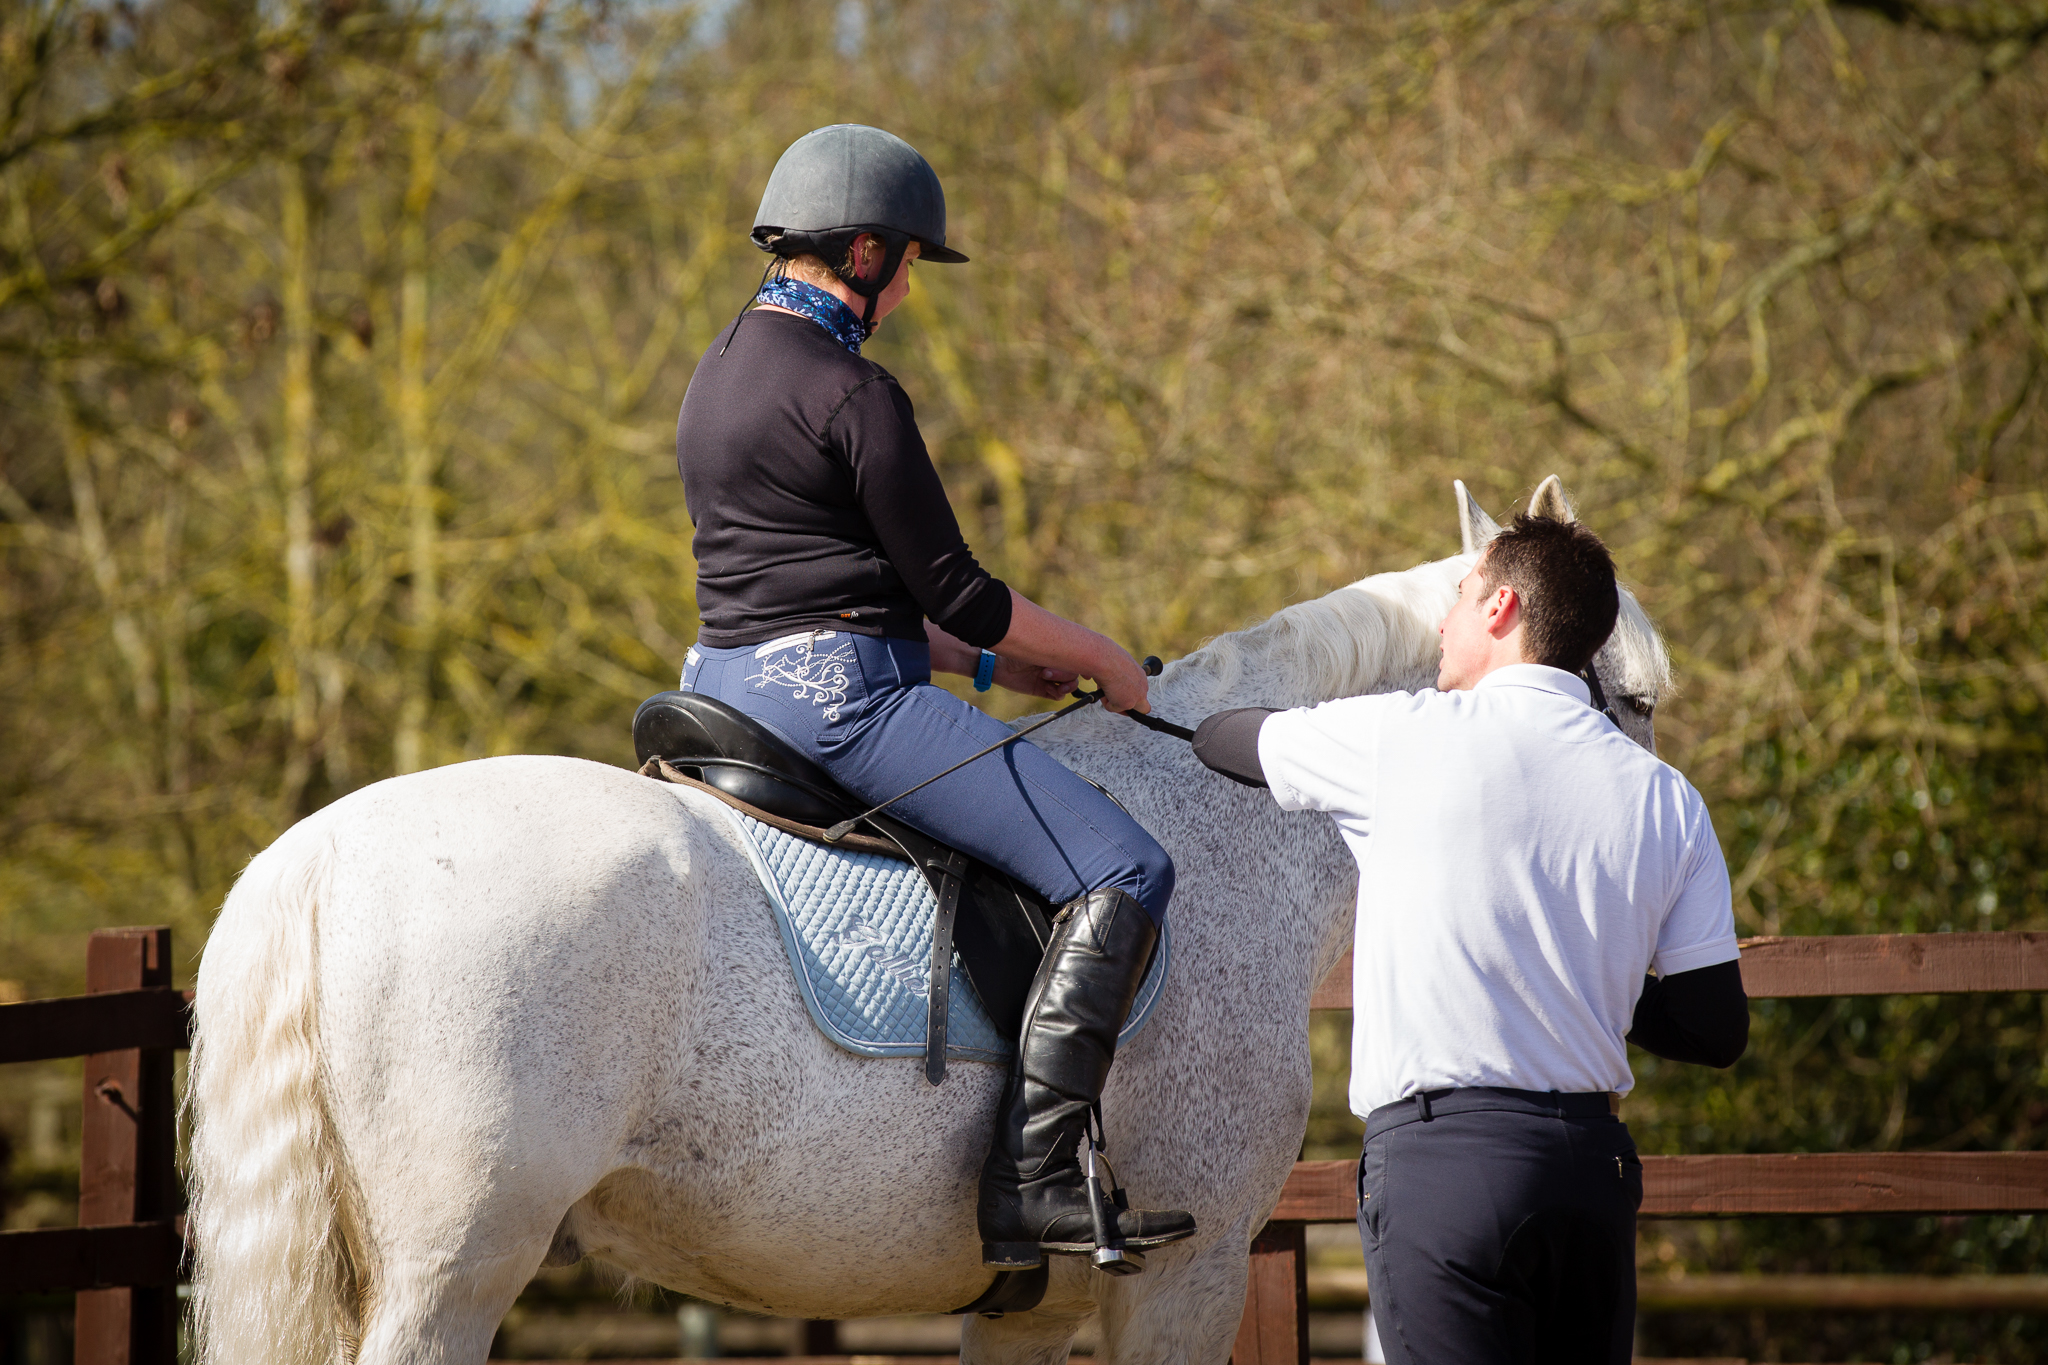 Roland helping a rider during a dressage lesson